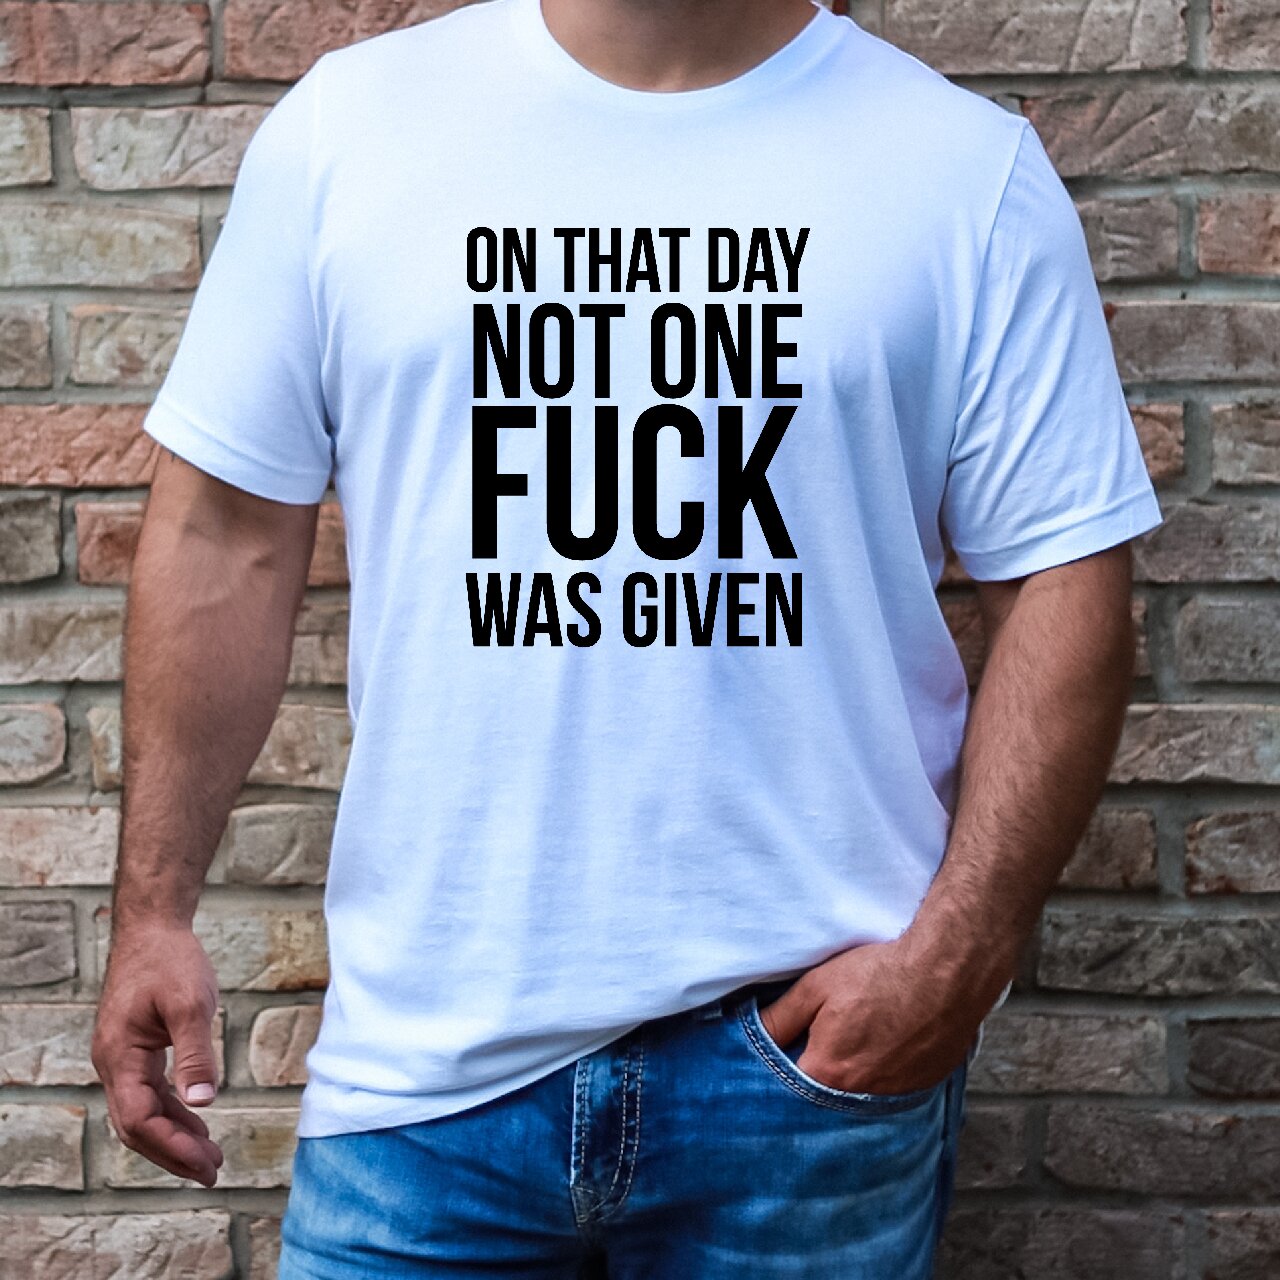 On That Day Not One Fuck Was Given - T-Shirt